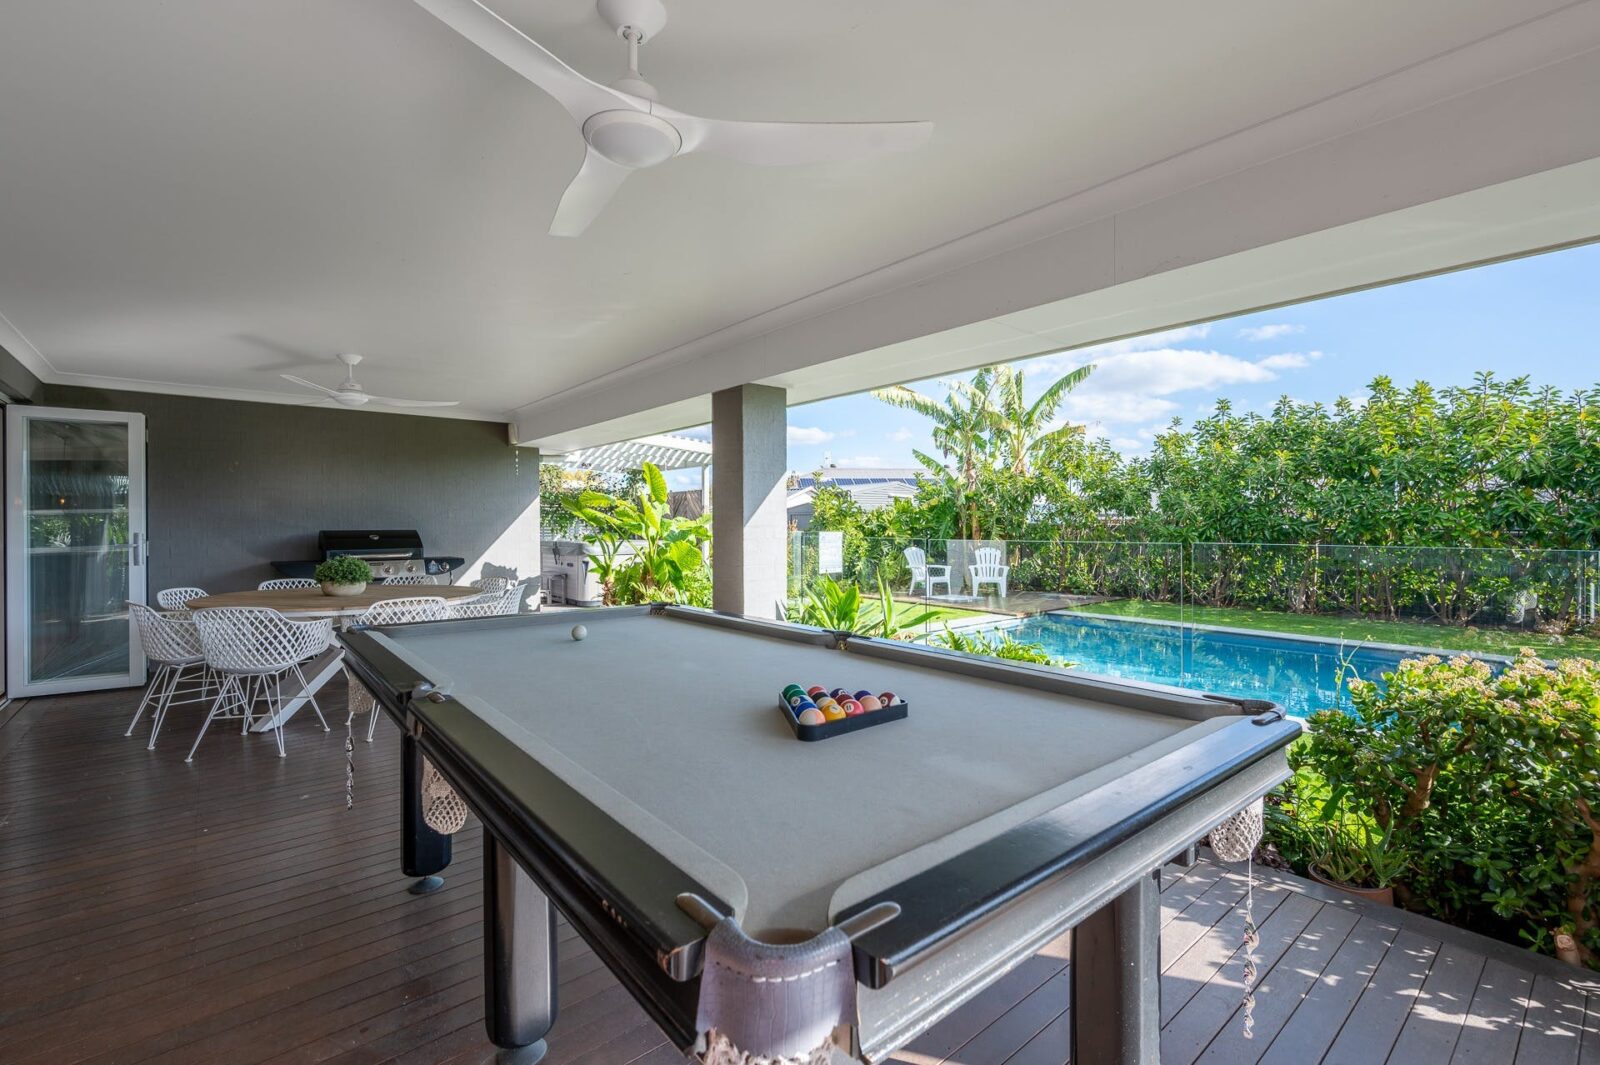 Outdoor entertaining area with BBQ and pool table, next to the pool and spa